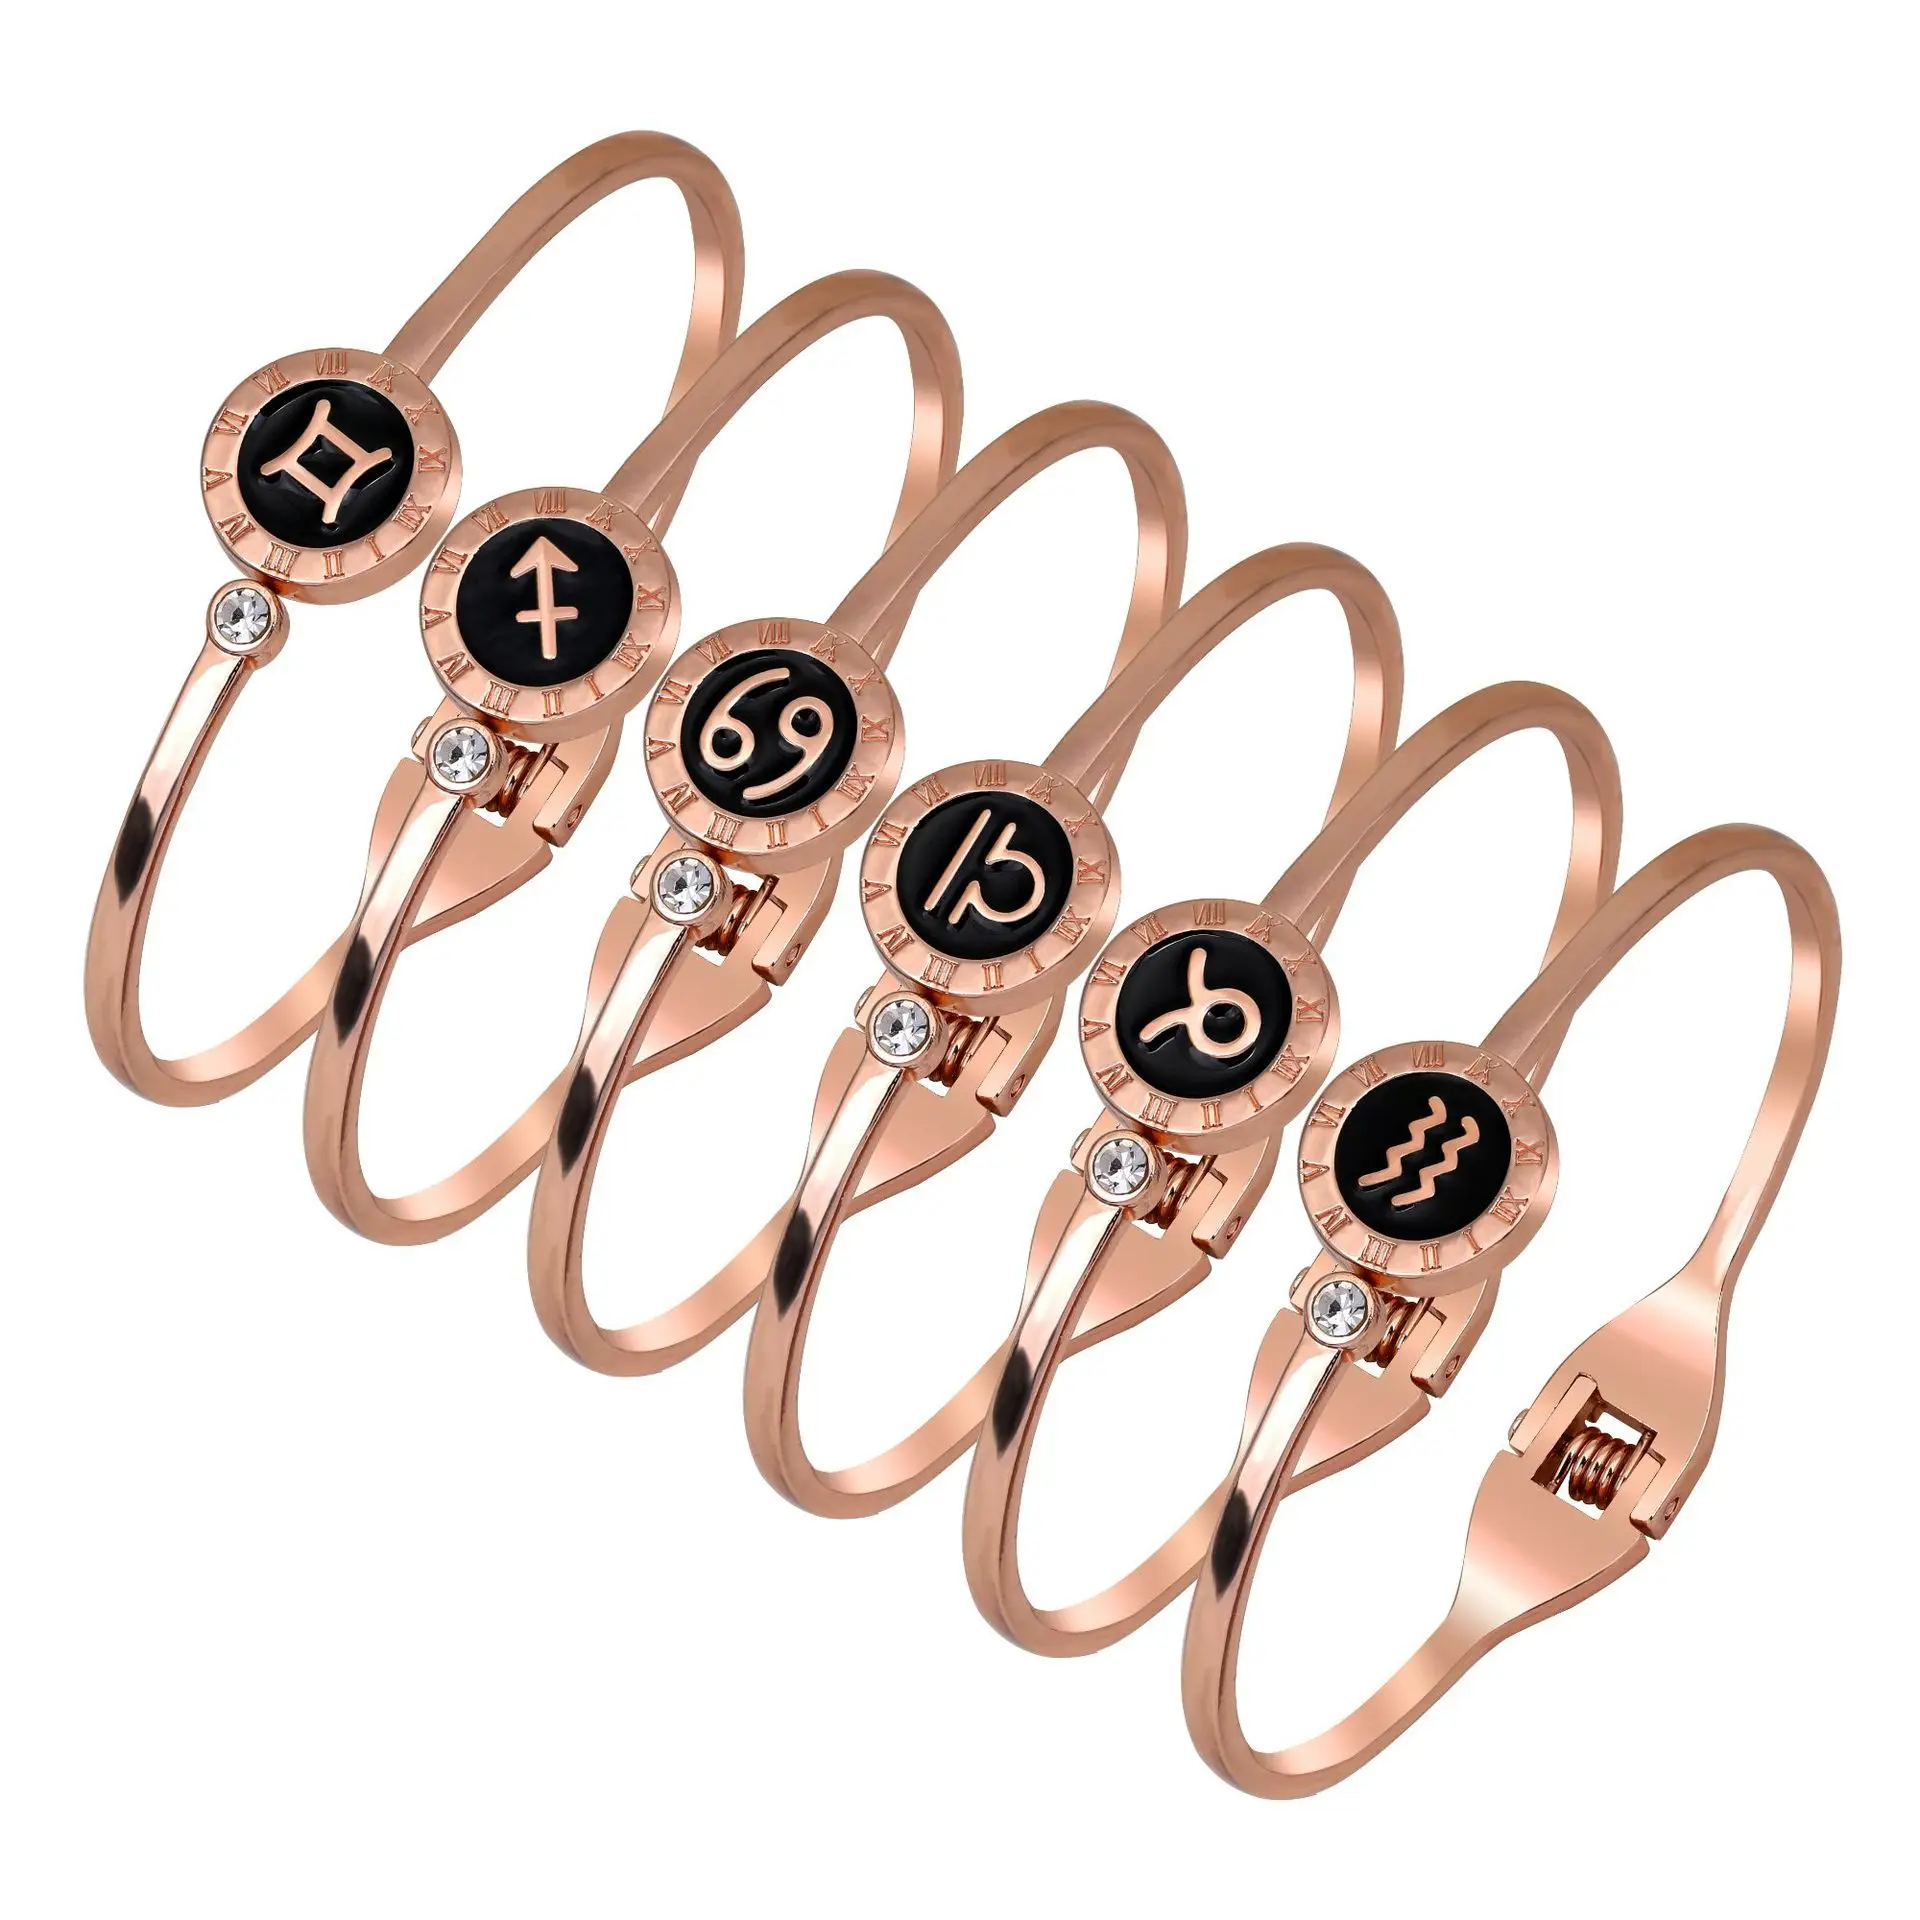 

2021 Amazon popular 12 zodiac signs bangle bracelet rose gold Stainless Steel crystal constellation cuff Bracelet for woman